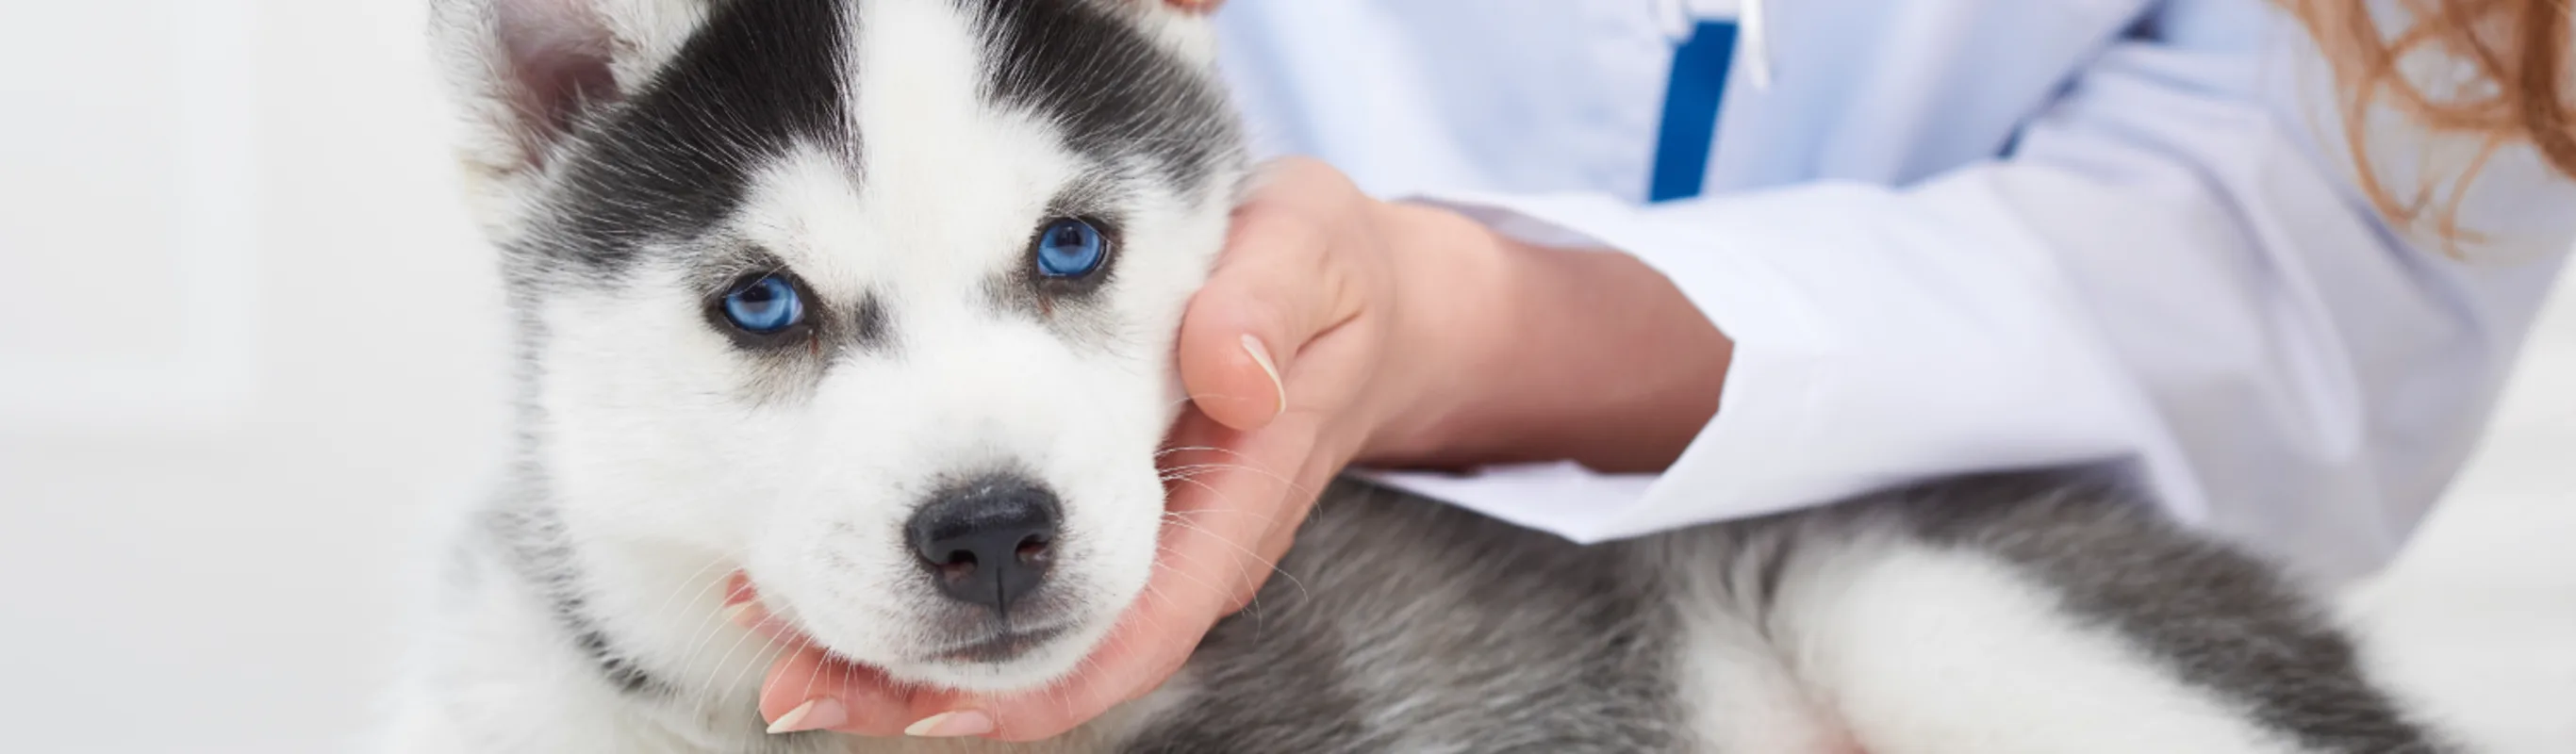 Young Husky Puppy getting a checkup by a nurse on table 